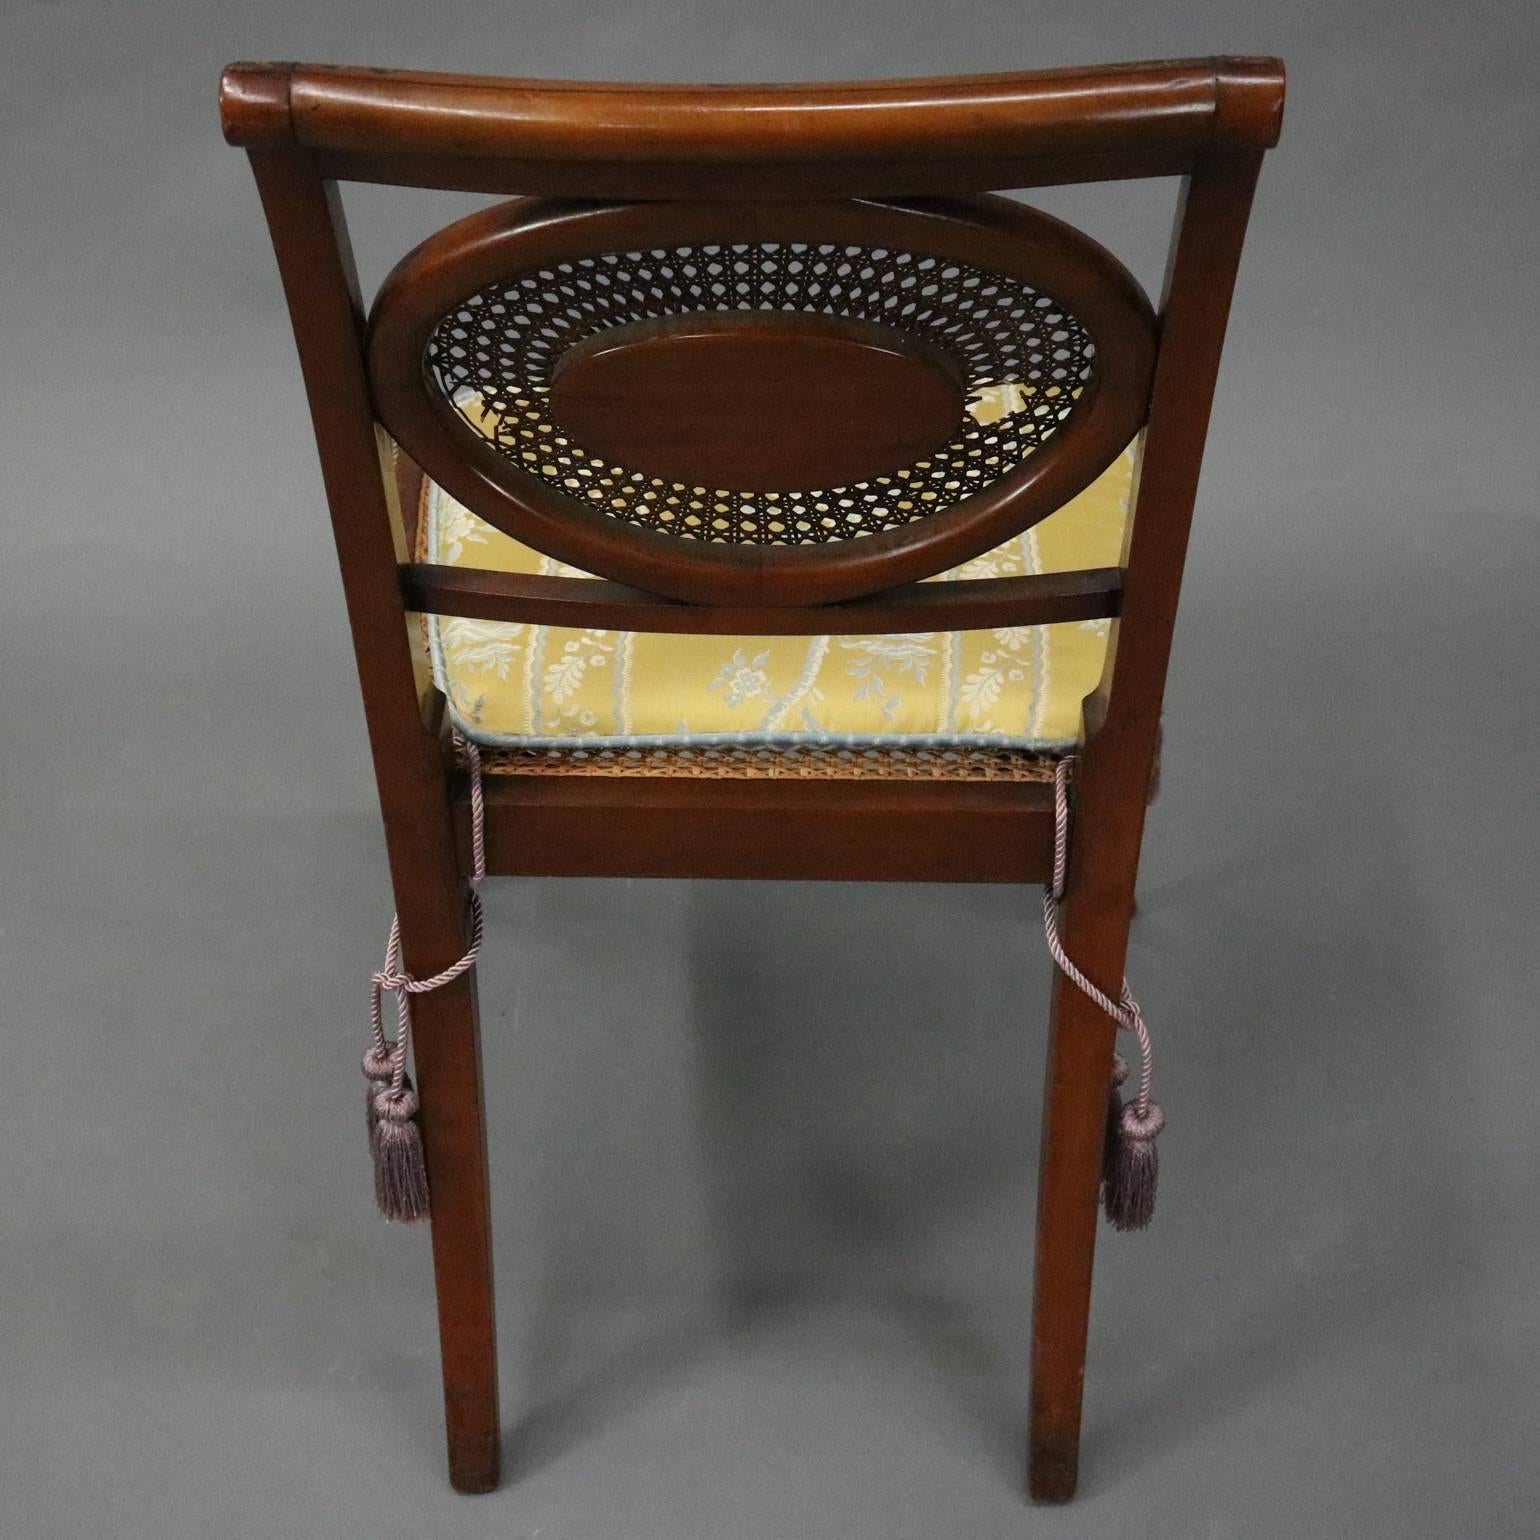 20th Century Antique English Regency Hand-Painted and Caned Mahogany Side Chair, circa 1890